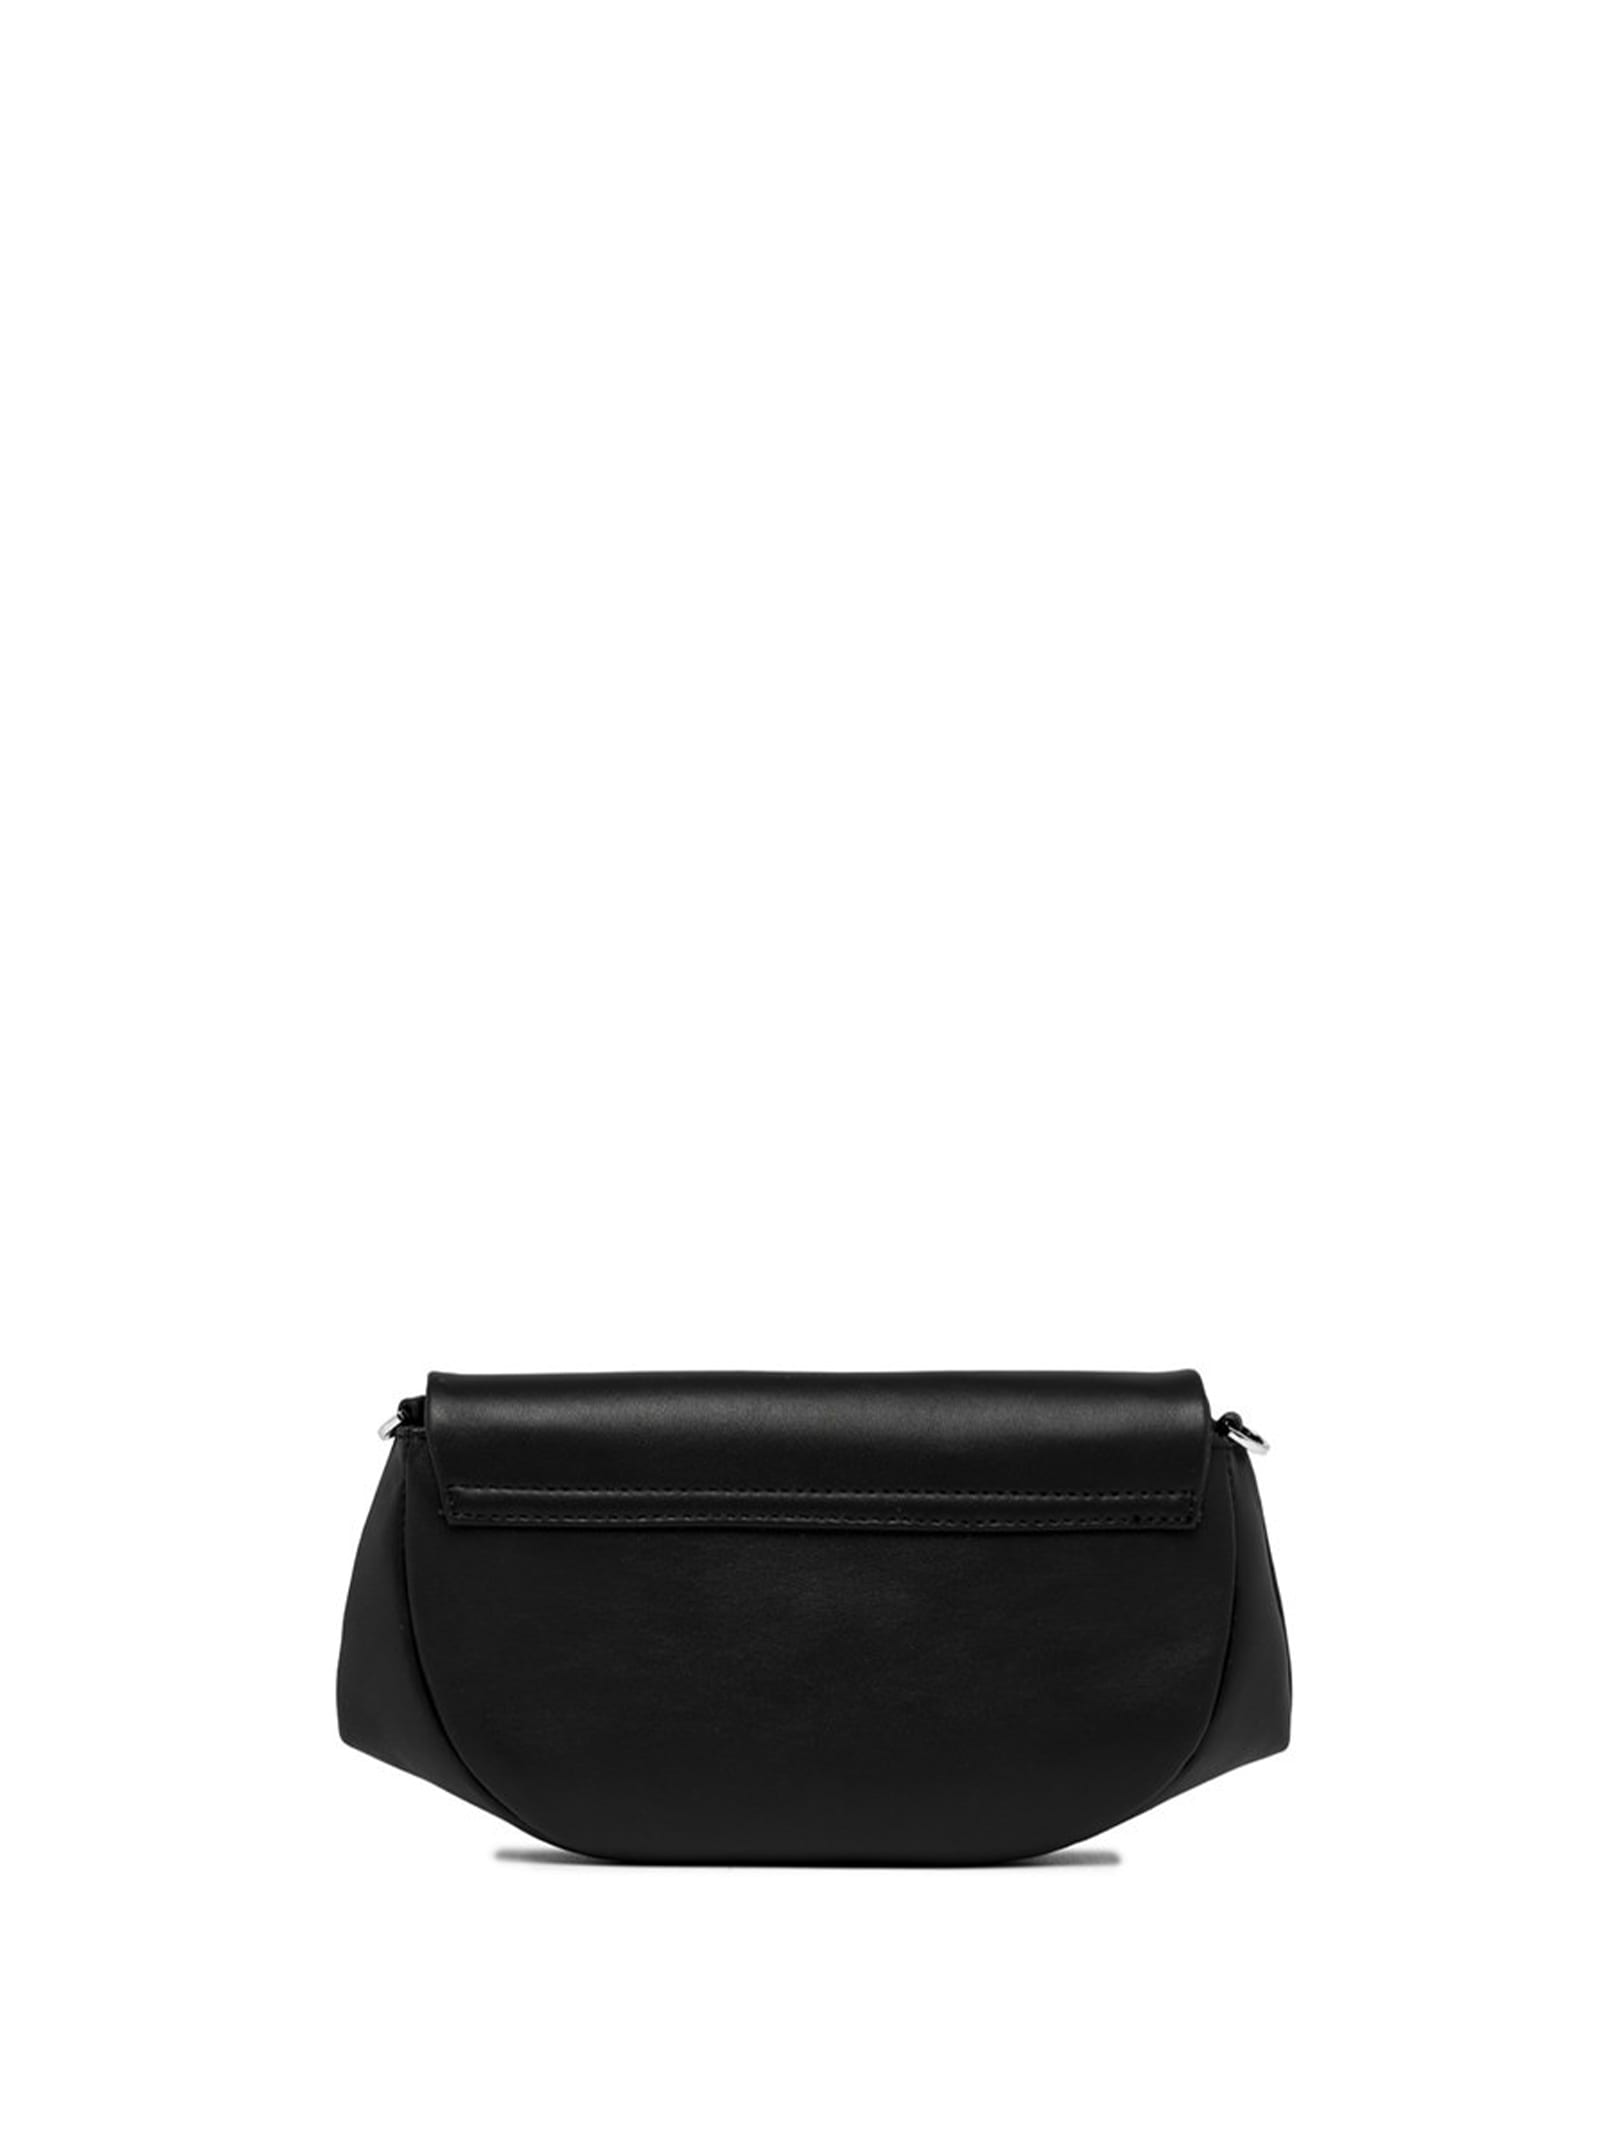 Shop Gianni Chiarini Adele Leather Clutch Bag With Shoulder Strap In Nero